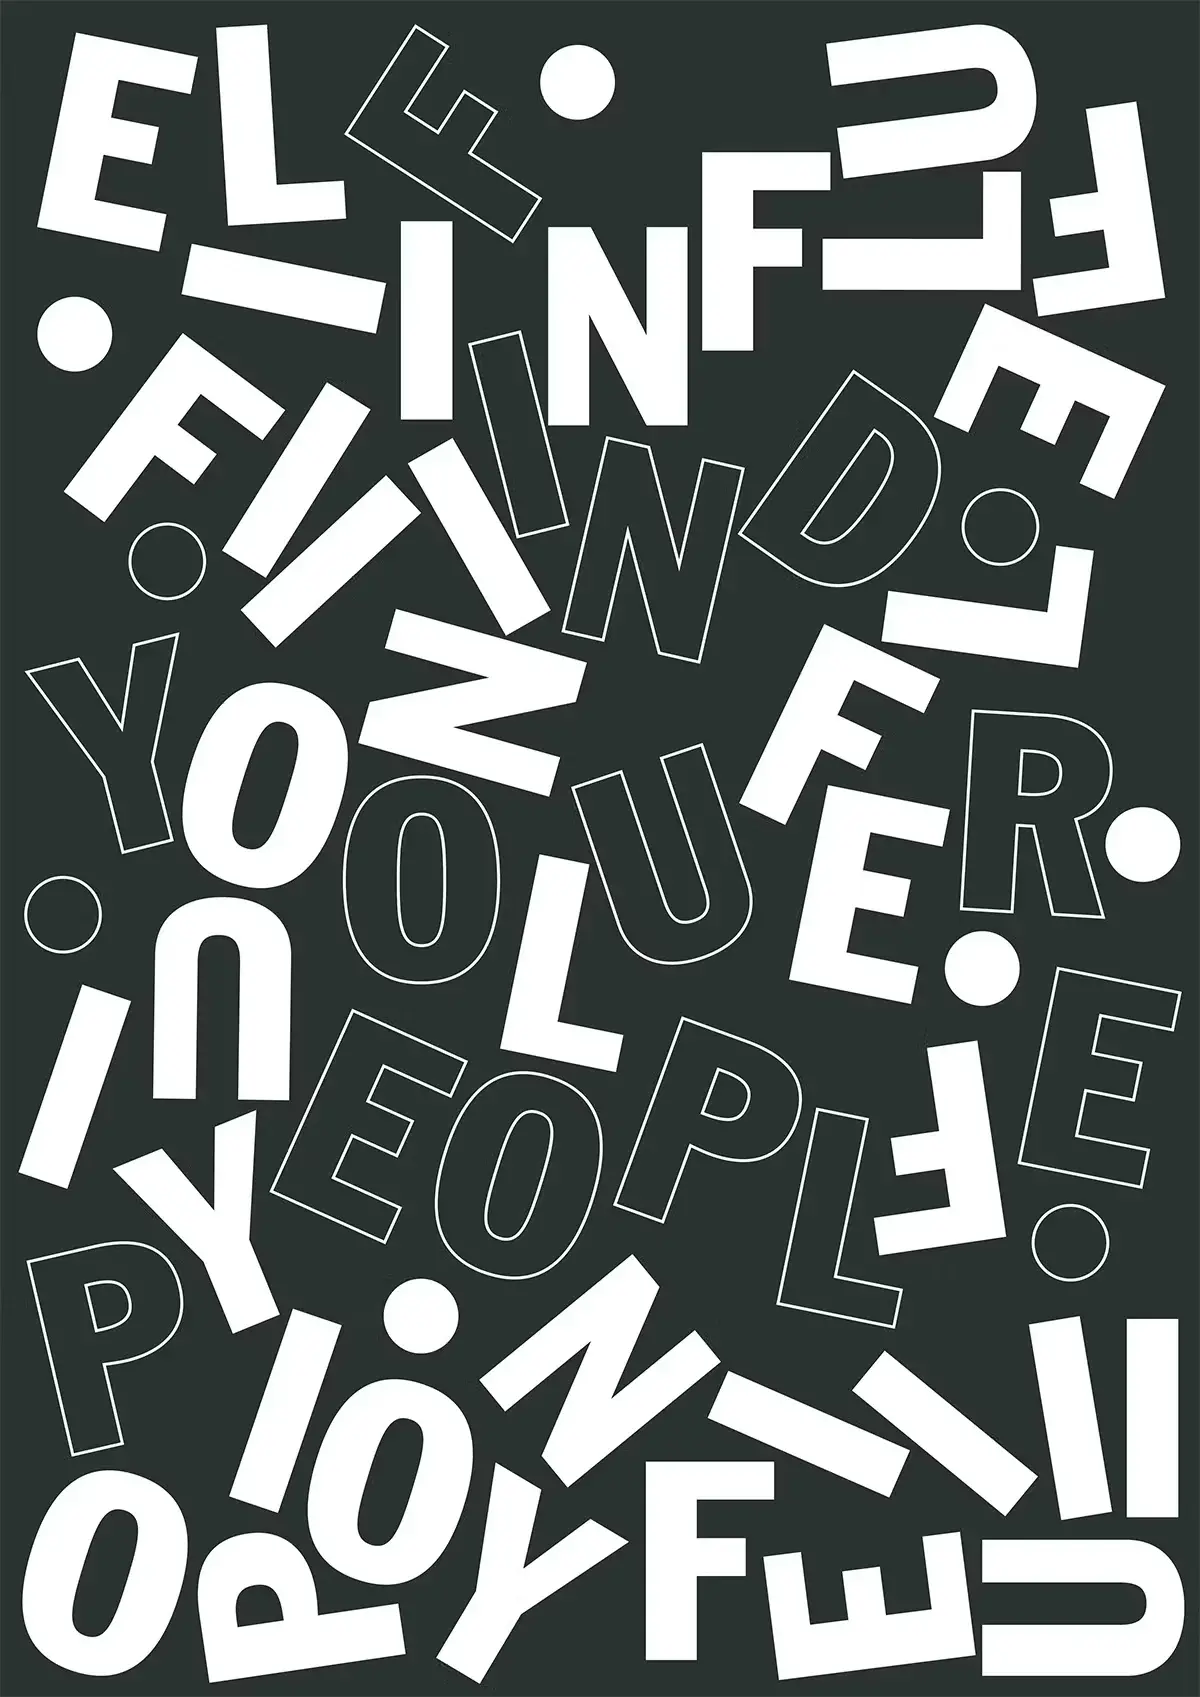 Blogduwebdesign inspiration affiches poster typographiques find your people